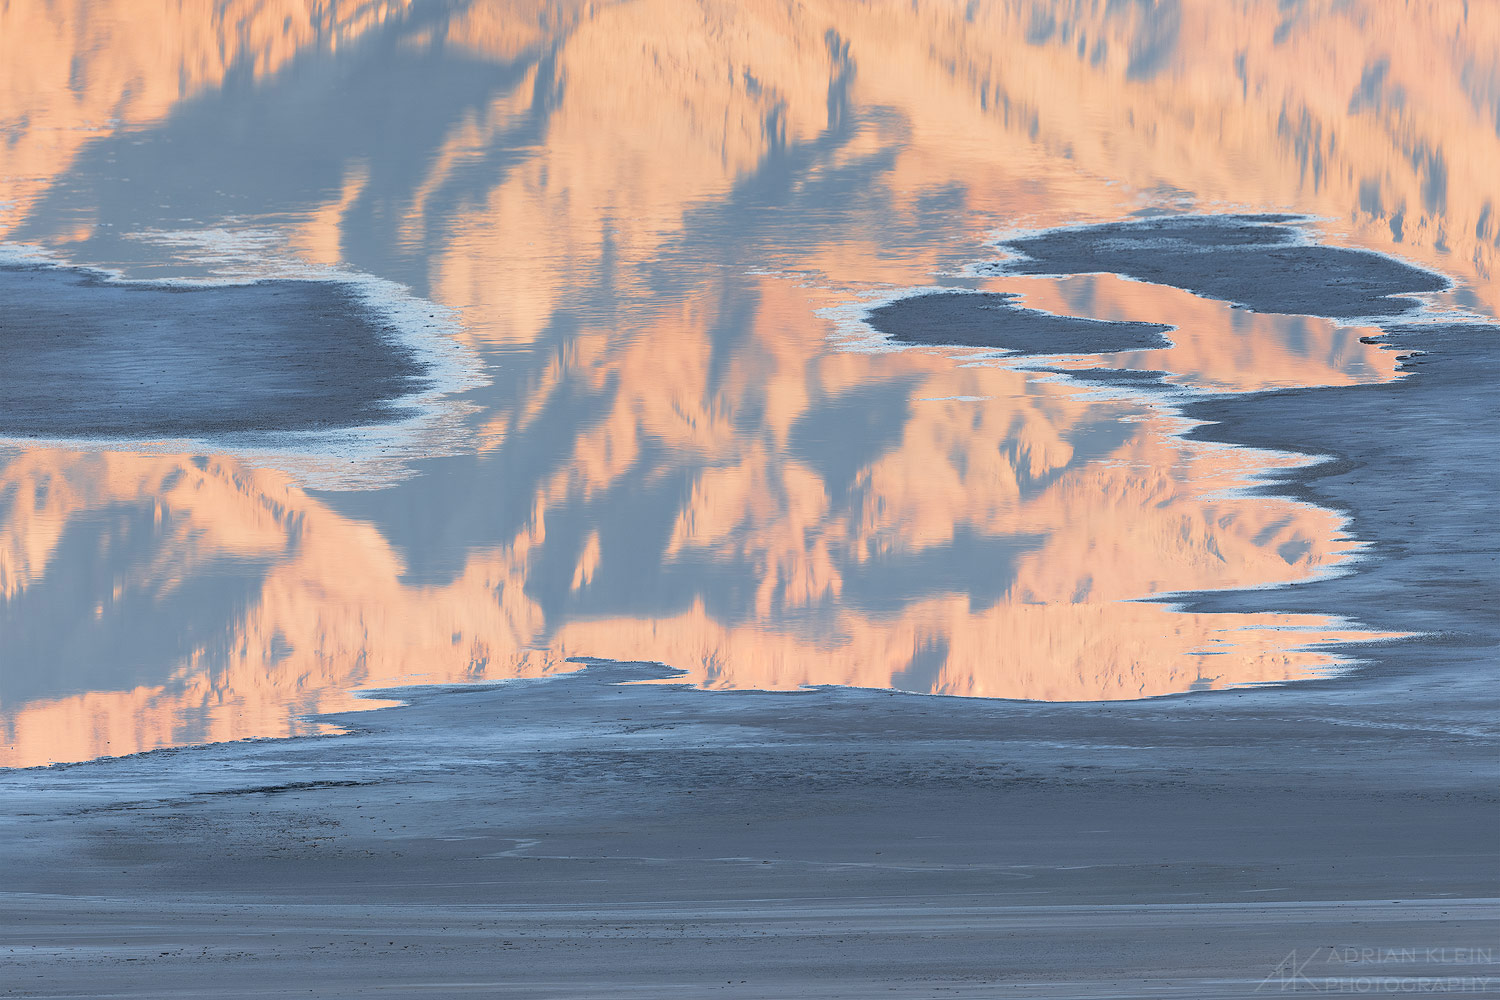 An abstract view at sunrise in Death Valley National Park.